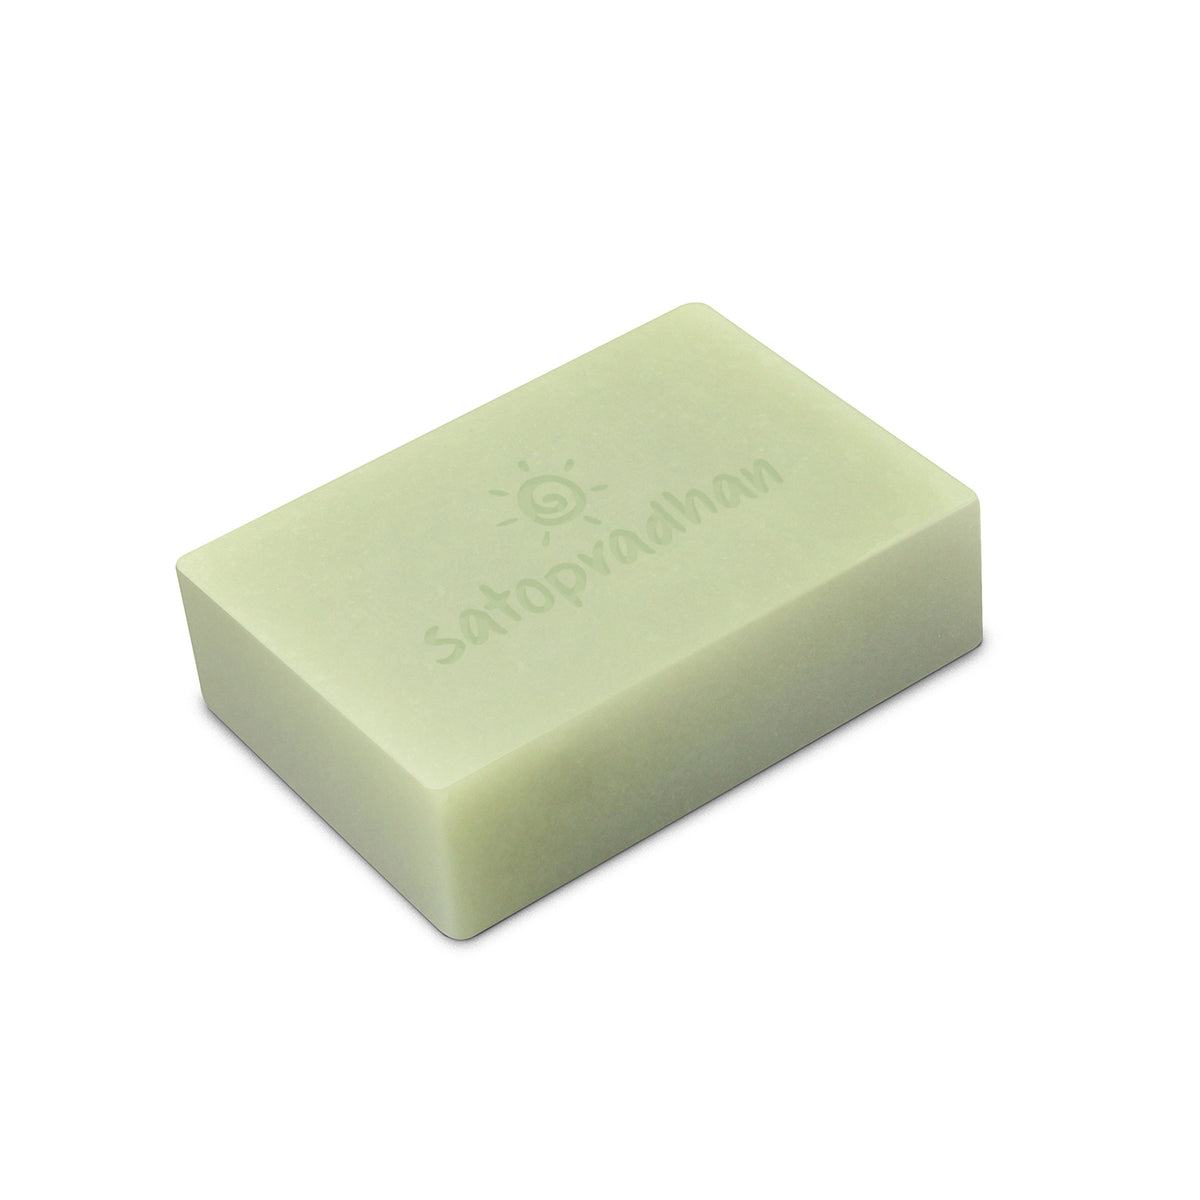 Herbal shampoo bar made with Organic ingredients helps in cleansing hair and reducing hairfall